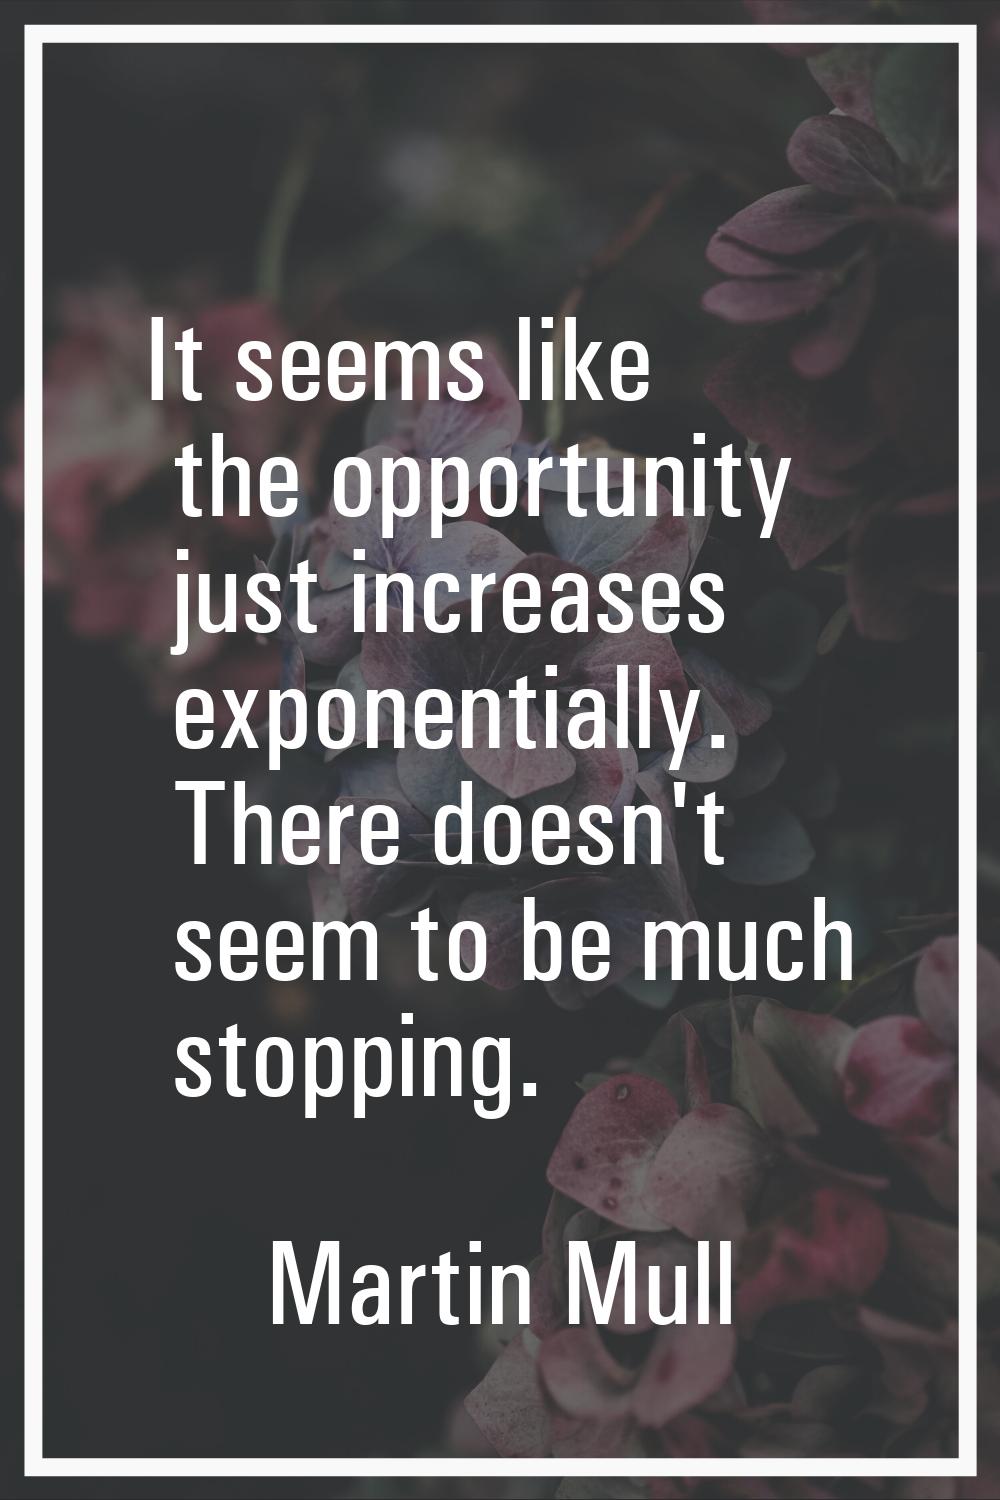 It seems like the opportunity just increases exponentially. There doesn't seem to be much stopping.